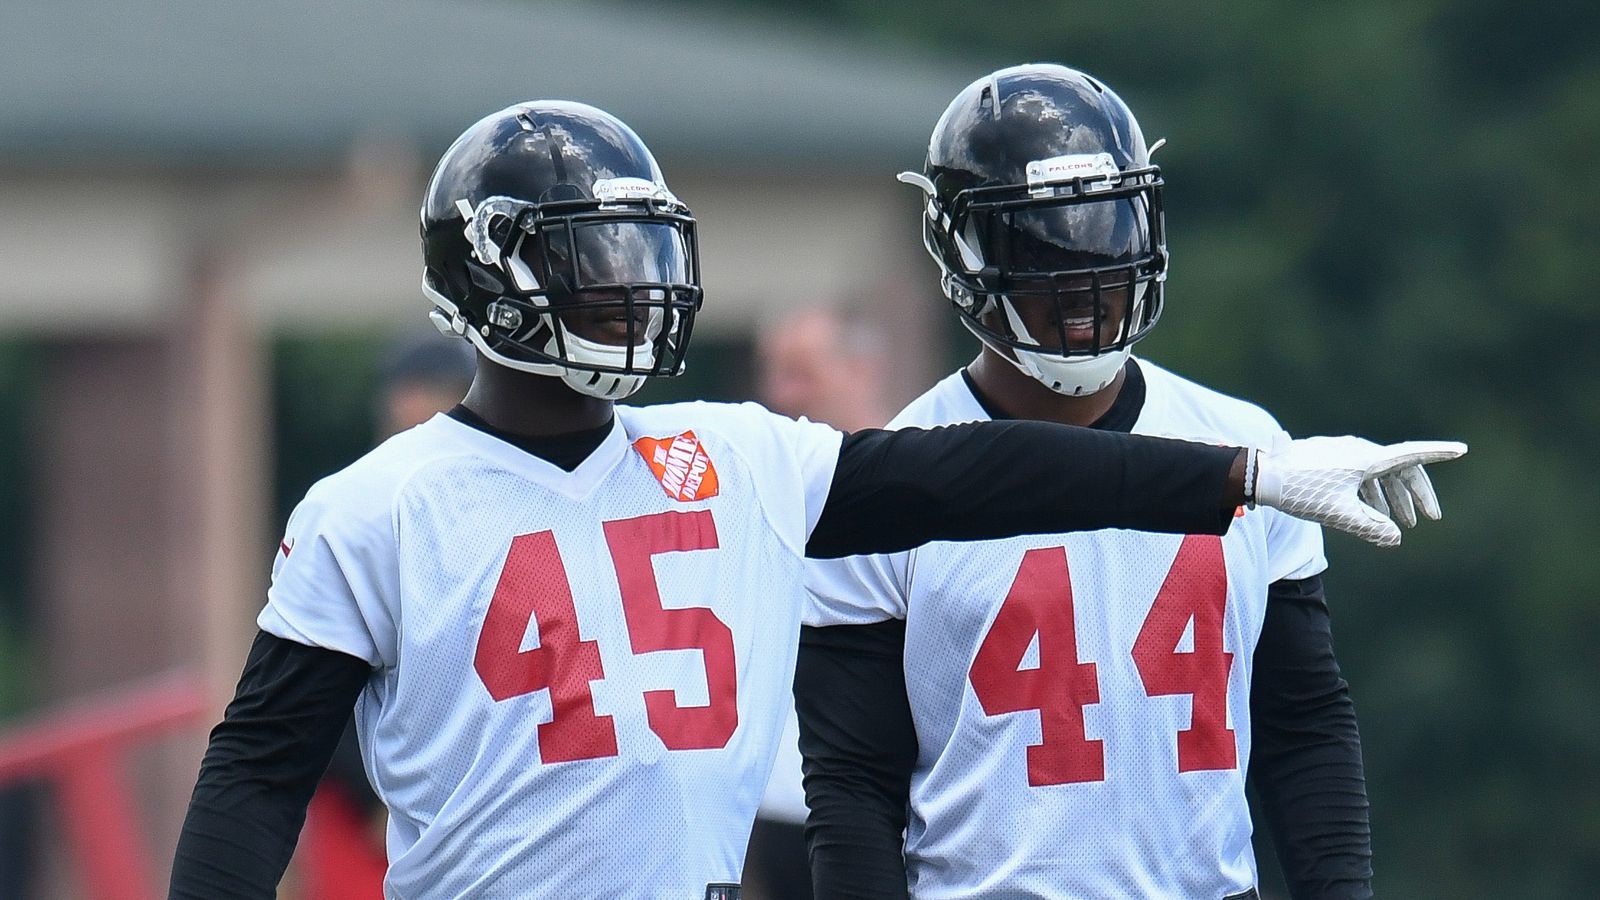 Cheap NFL Jerseys Sale - What did we learn from Falcons minicamp 2016? - The Falcoholic